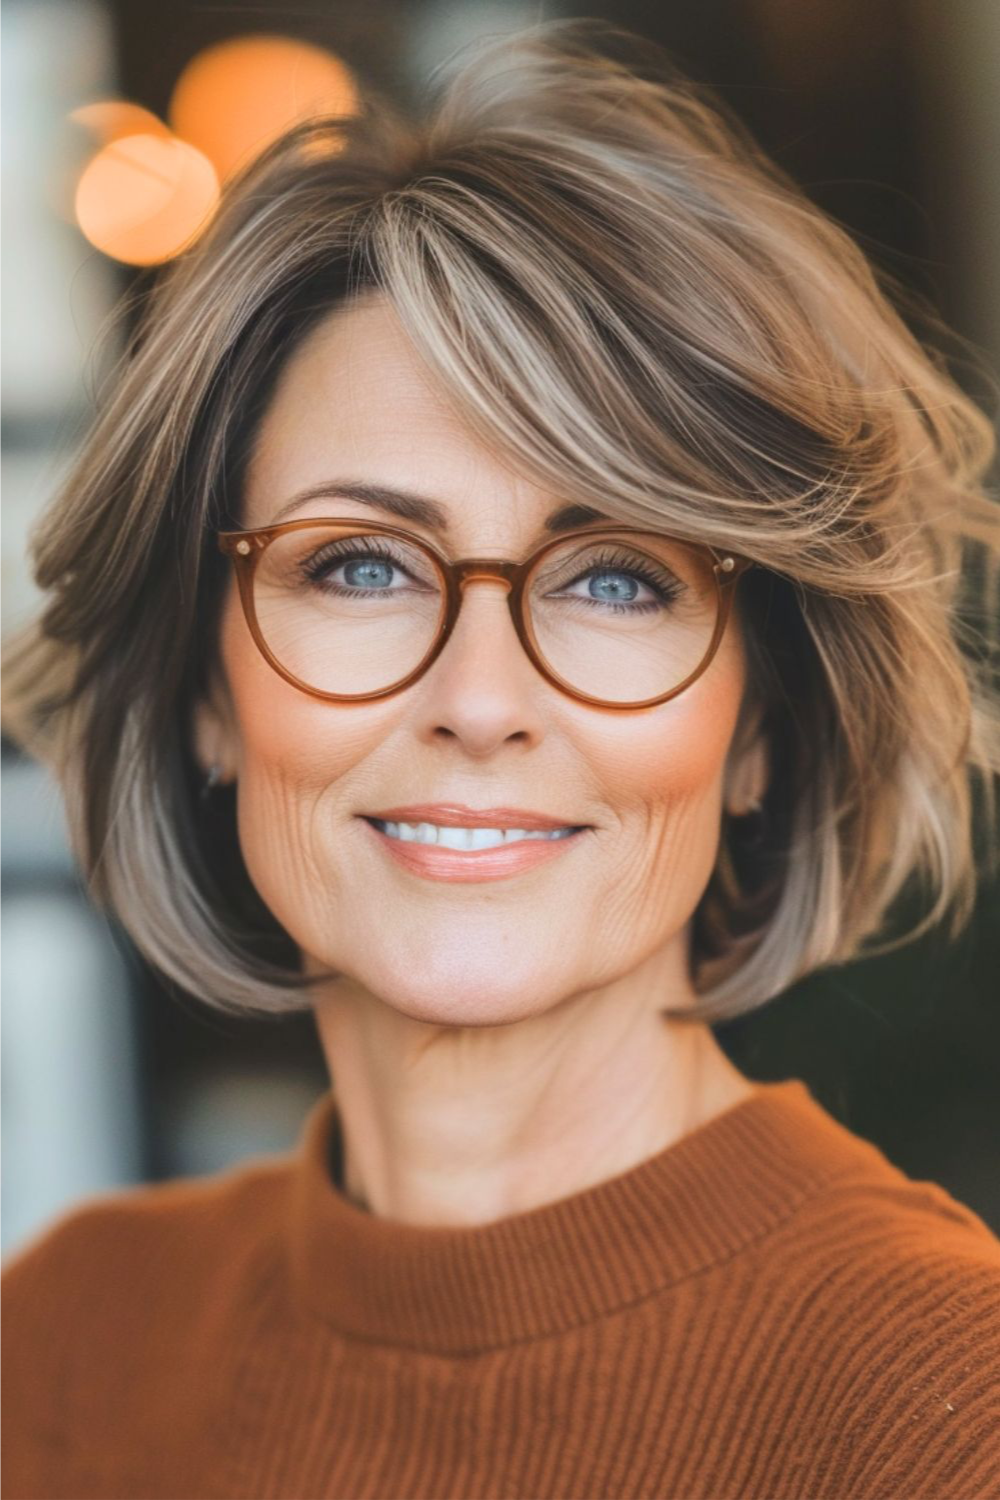 Chic and Timeless: Hairstyles for Women Over 50